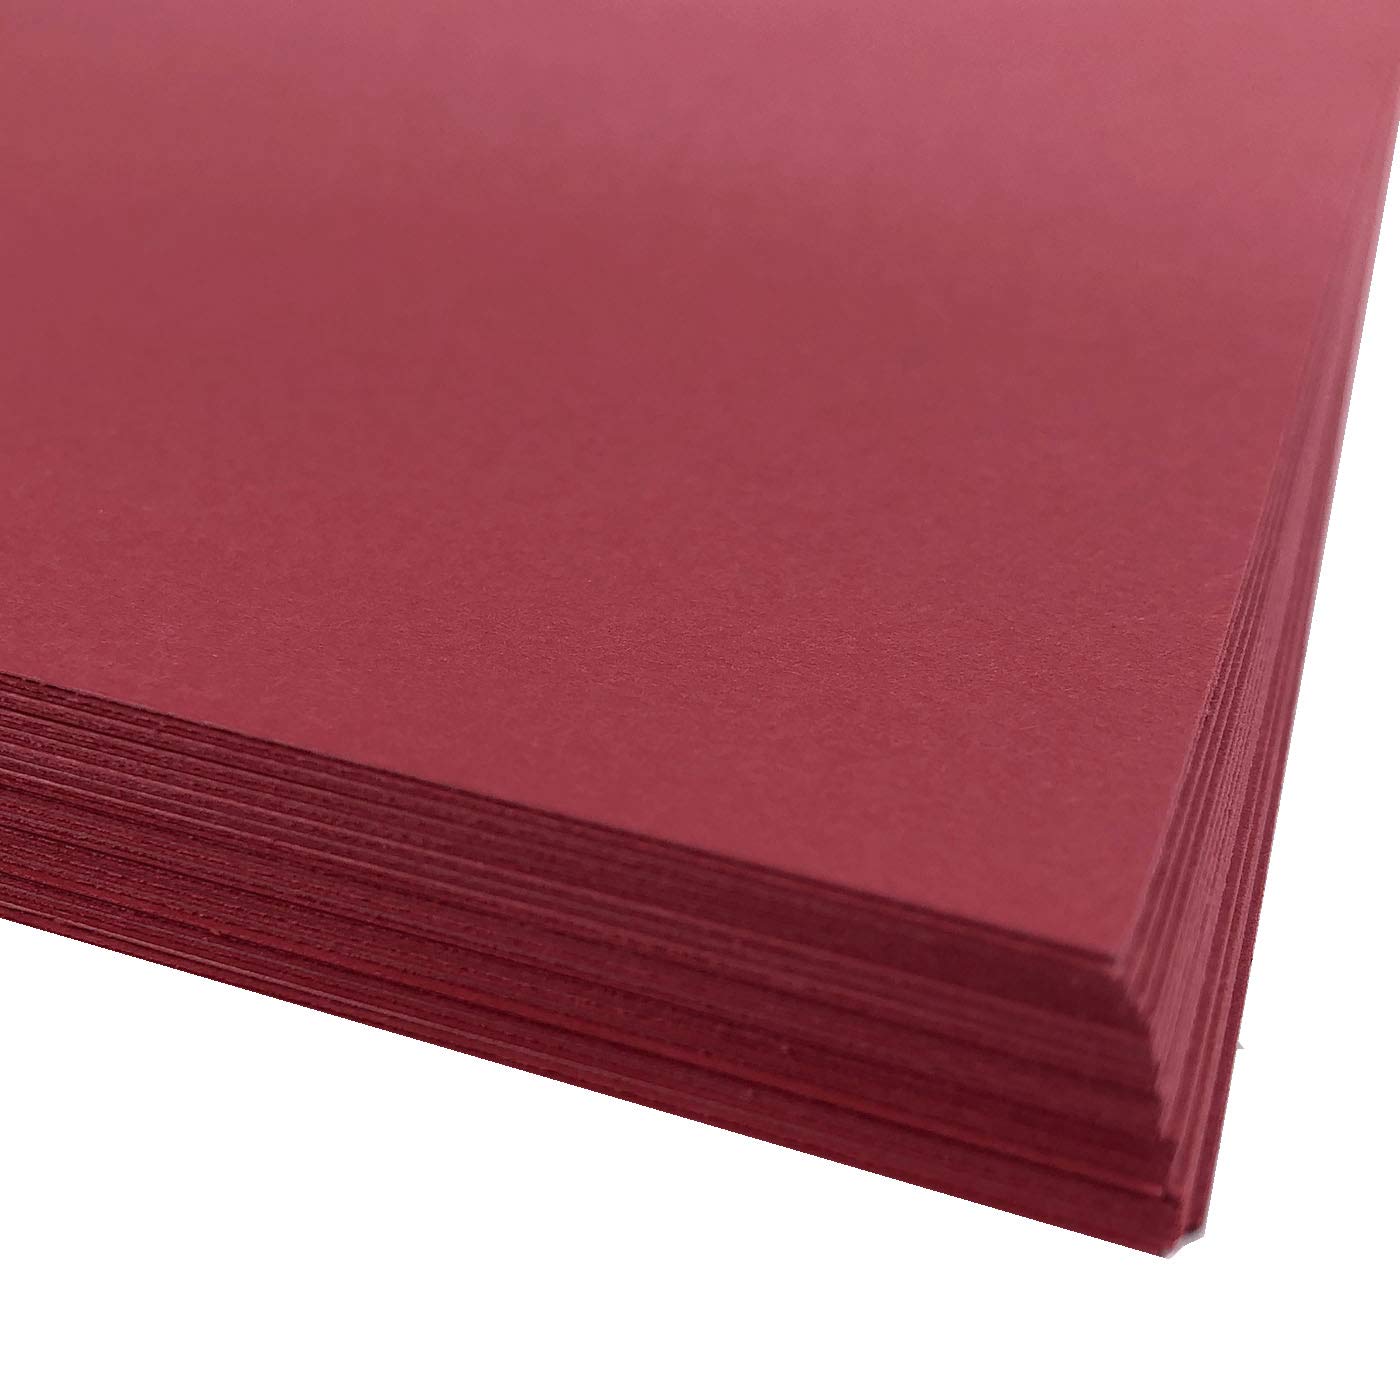 A4 Red Card Paper Printer - 160gsm 40 Sheets - Coloured Craft Card - Suitable for Craft, Printing, Copying, Photocopiers